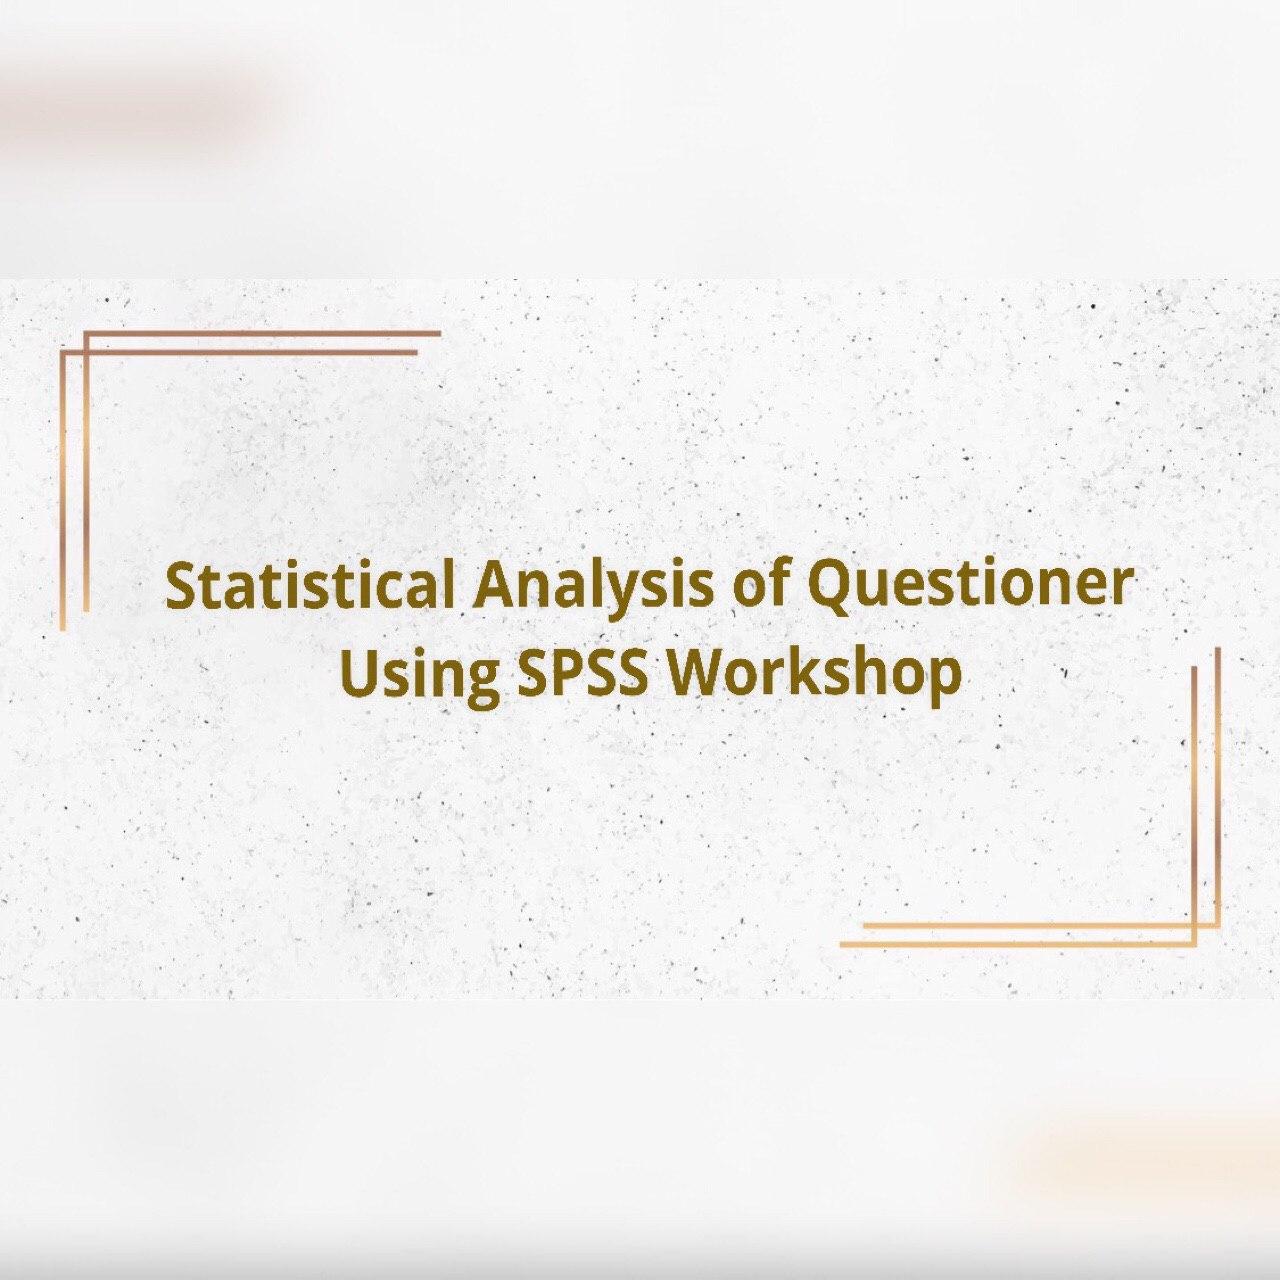 You are currently viewing Statistical Analysis of Questioner using SPSS Workshop